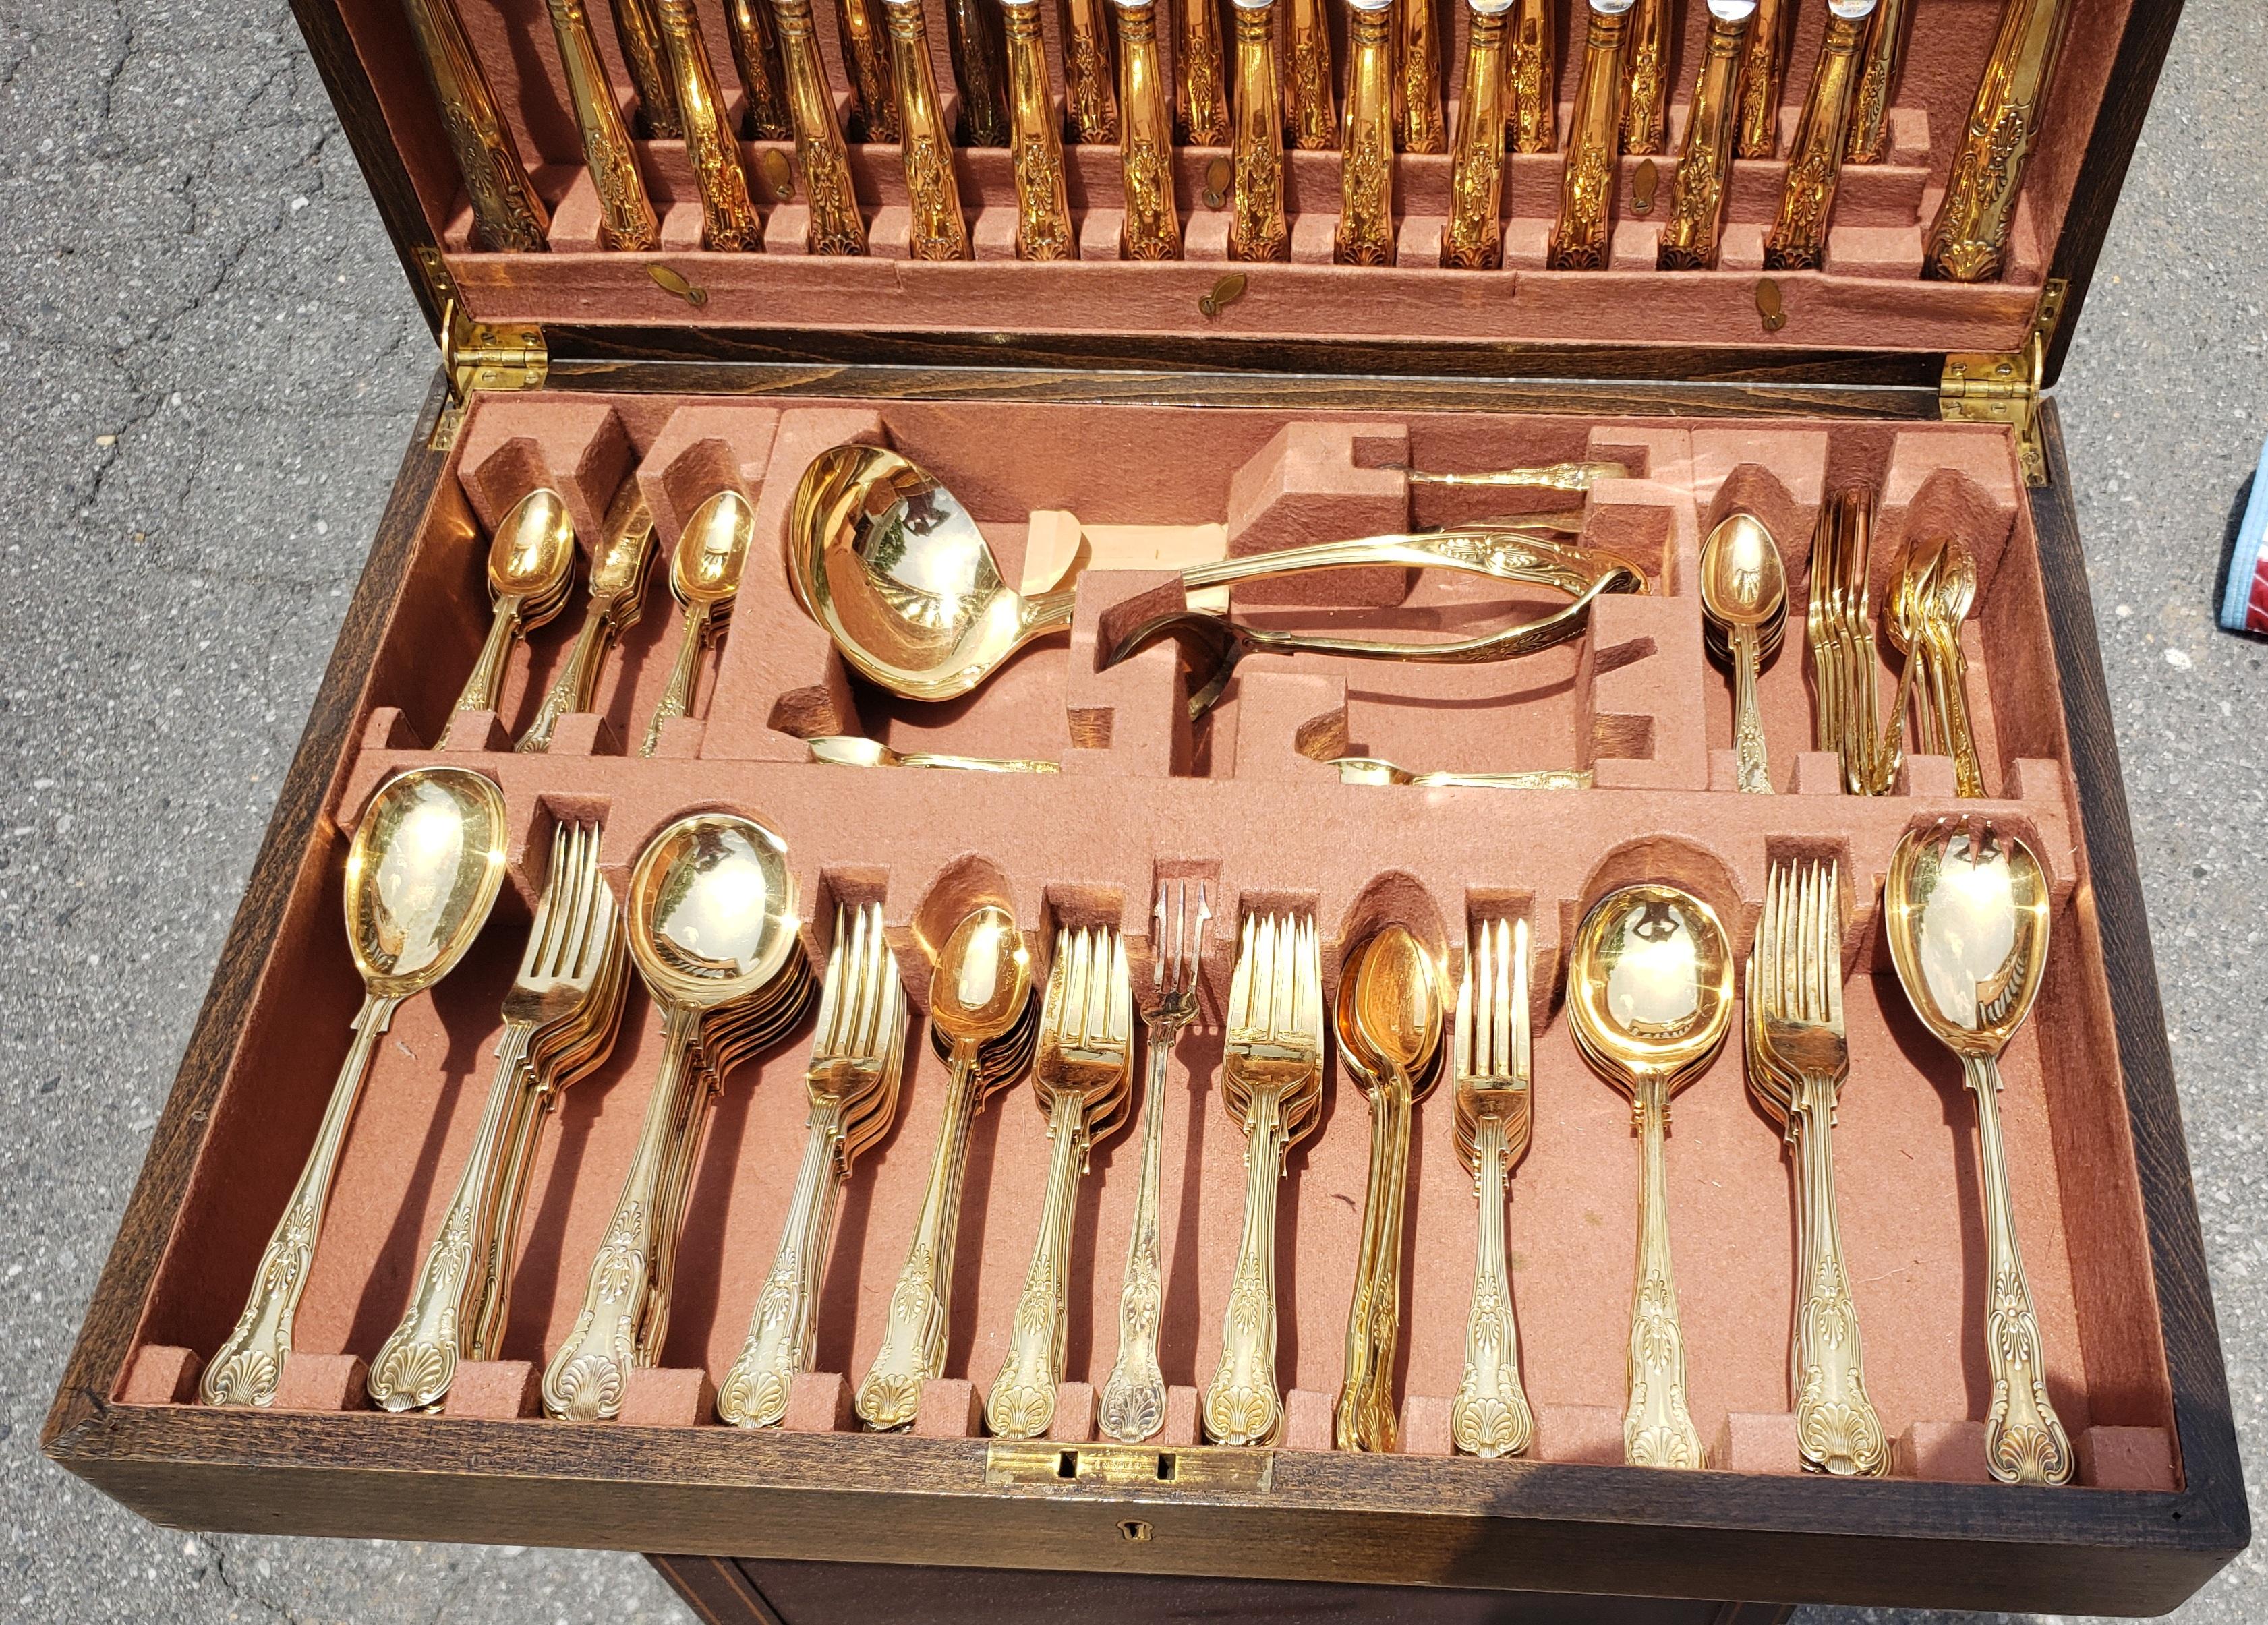 . Shell & Plume Kings Pattern John Turton SP Flatware. Huge service, silver plate with gold plating on top, John Turton, 24 teaspoons, 12 enormous dinner forks, 12 luncheon forks that would pass for dinner forks, 12 dinner knives, 12 luncheon